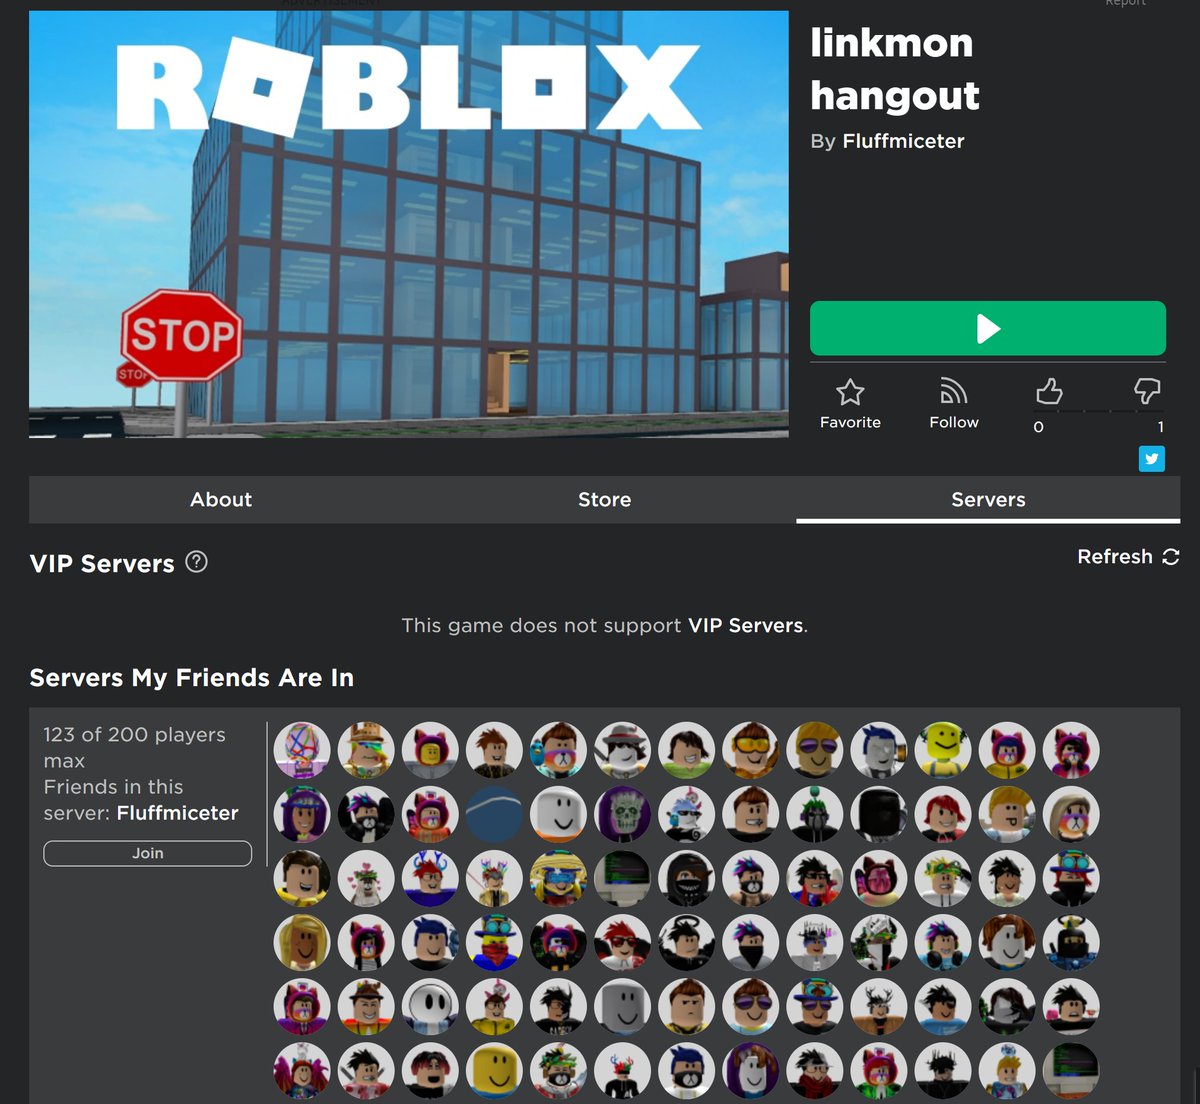 Tommy Code Linkmon99 On Twitter Was Testing My Linkmob Hangout Minigames For The Stream Tonight With Fluffmiceter Then 5 Minutes Later The Entire Linkmob Joins Lol Https T Co Dzp2qnwcuu - what is linkmon99 password in roblox